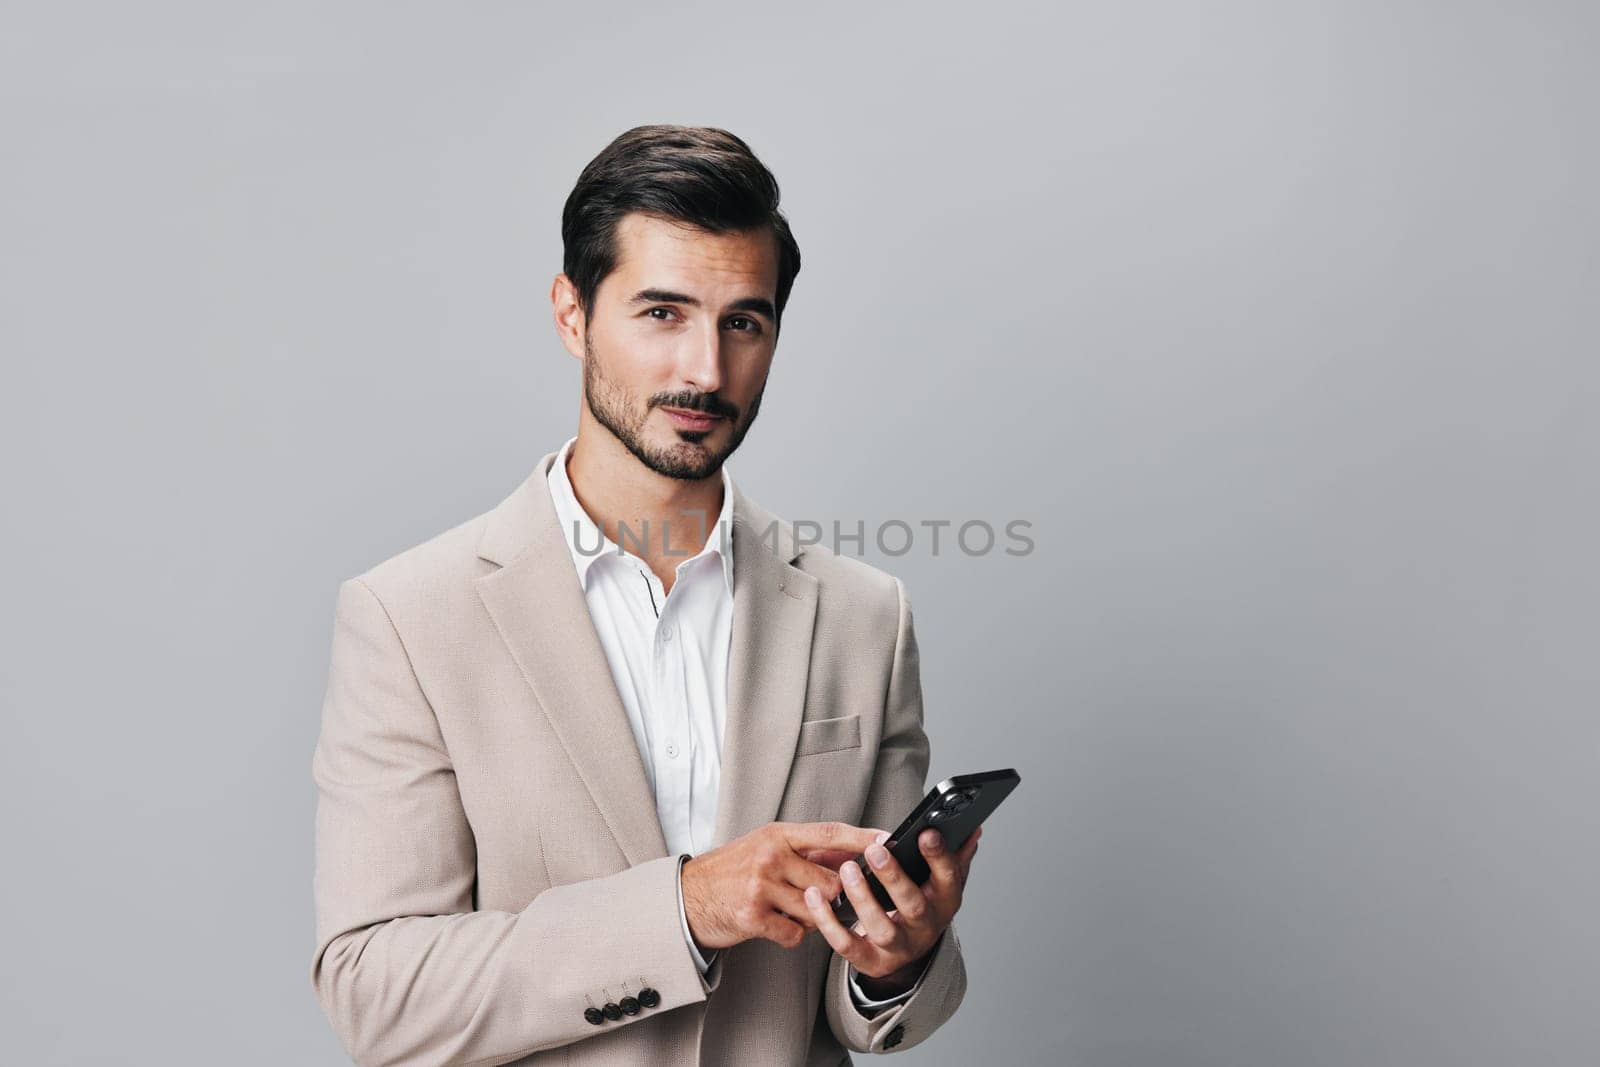 hold man cyberspace copy space beige connection gray male entrepreneur smile business technology white holding call suit smartphone young phone happy portrait